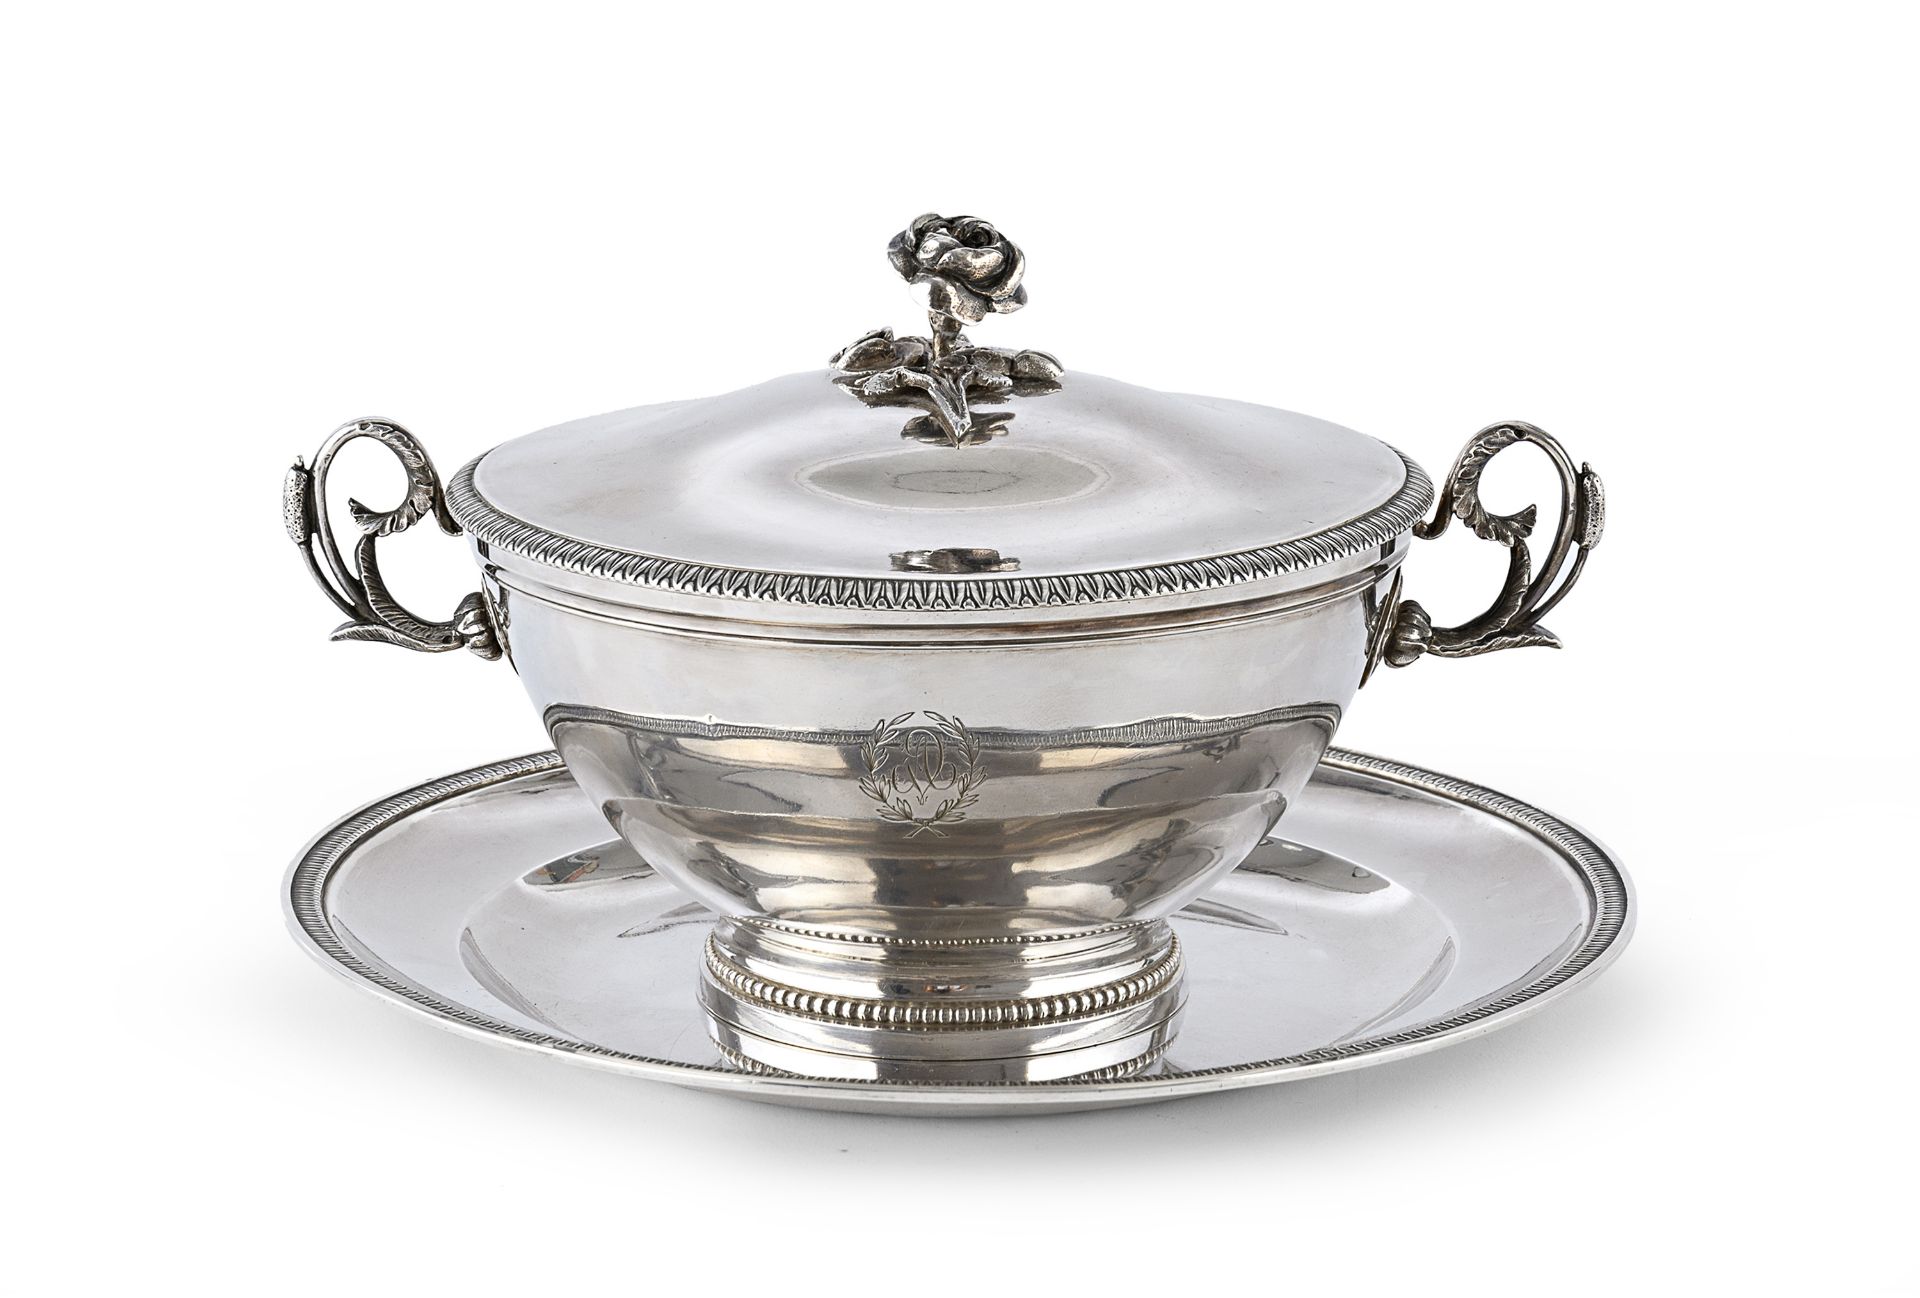 SILVER TUREEN WITH PLATE PARIS 1819/1938